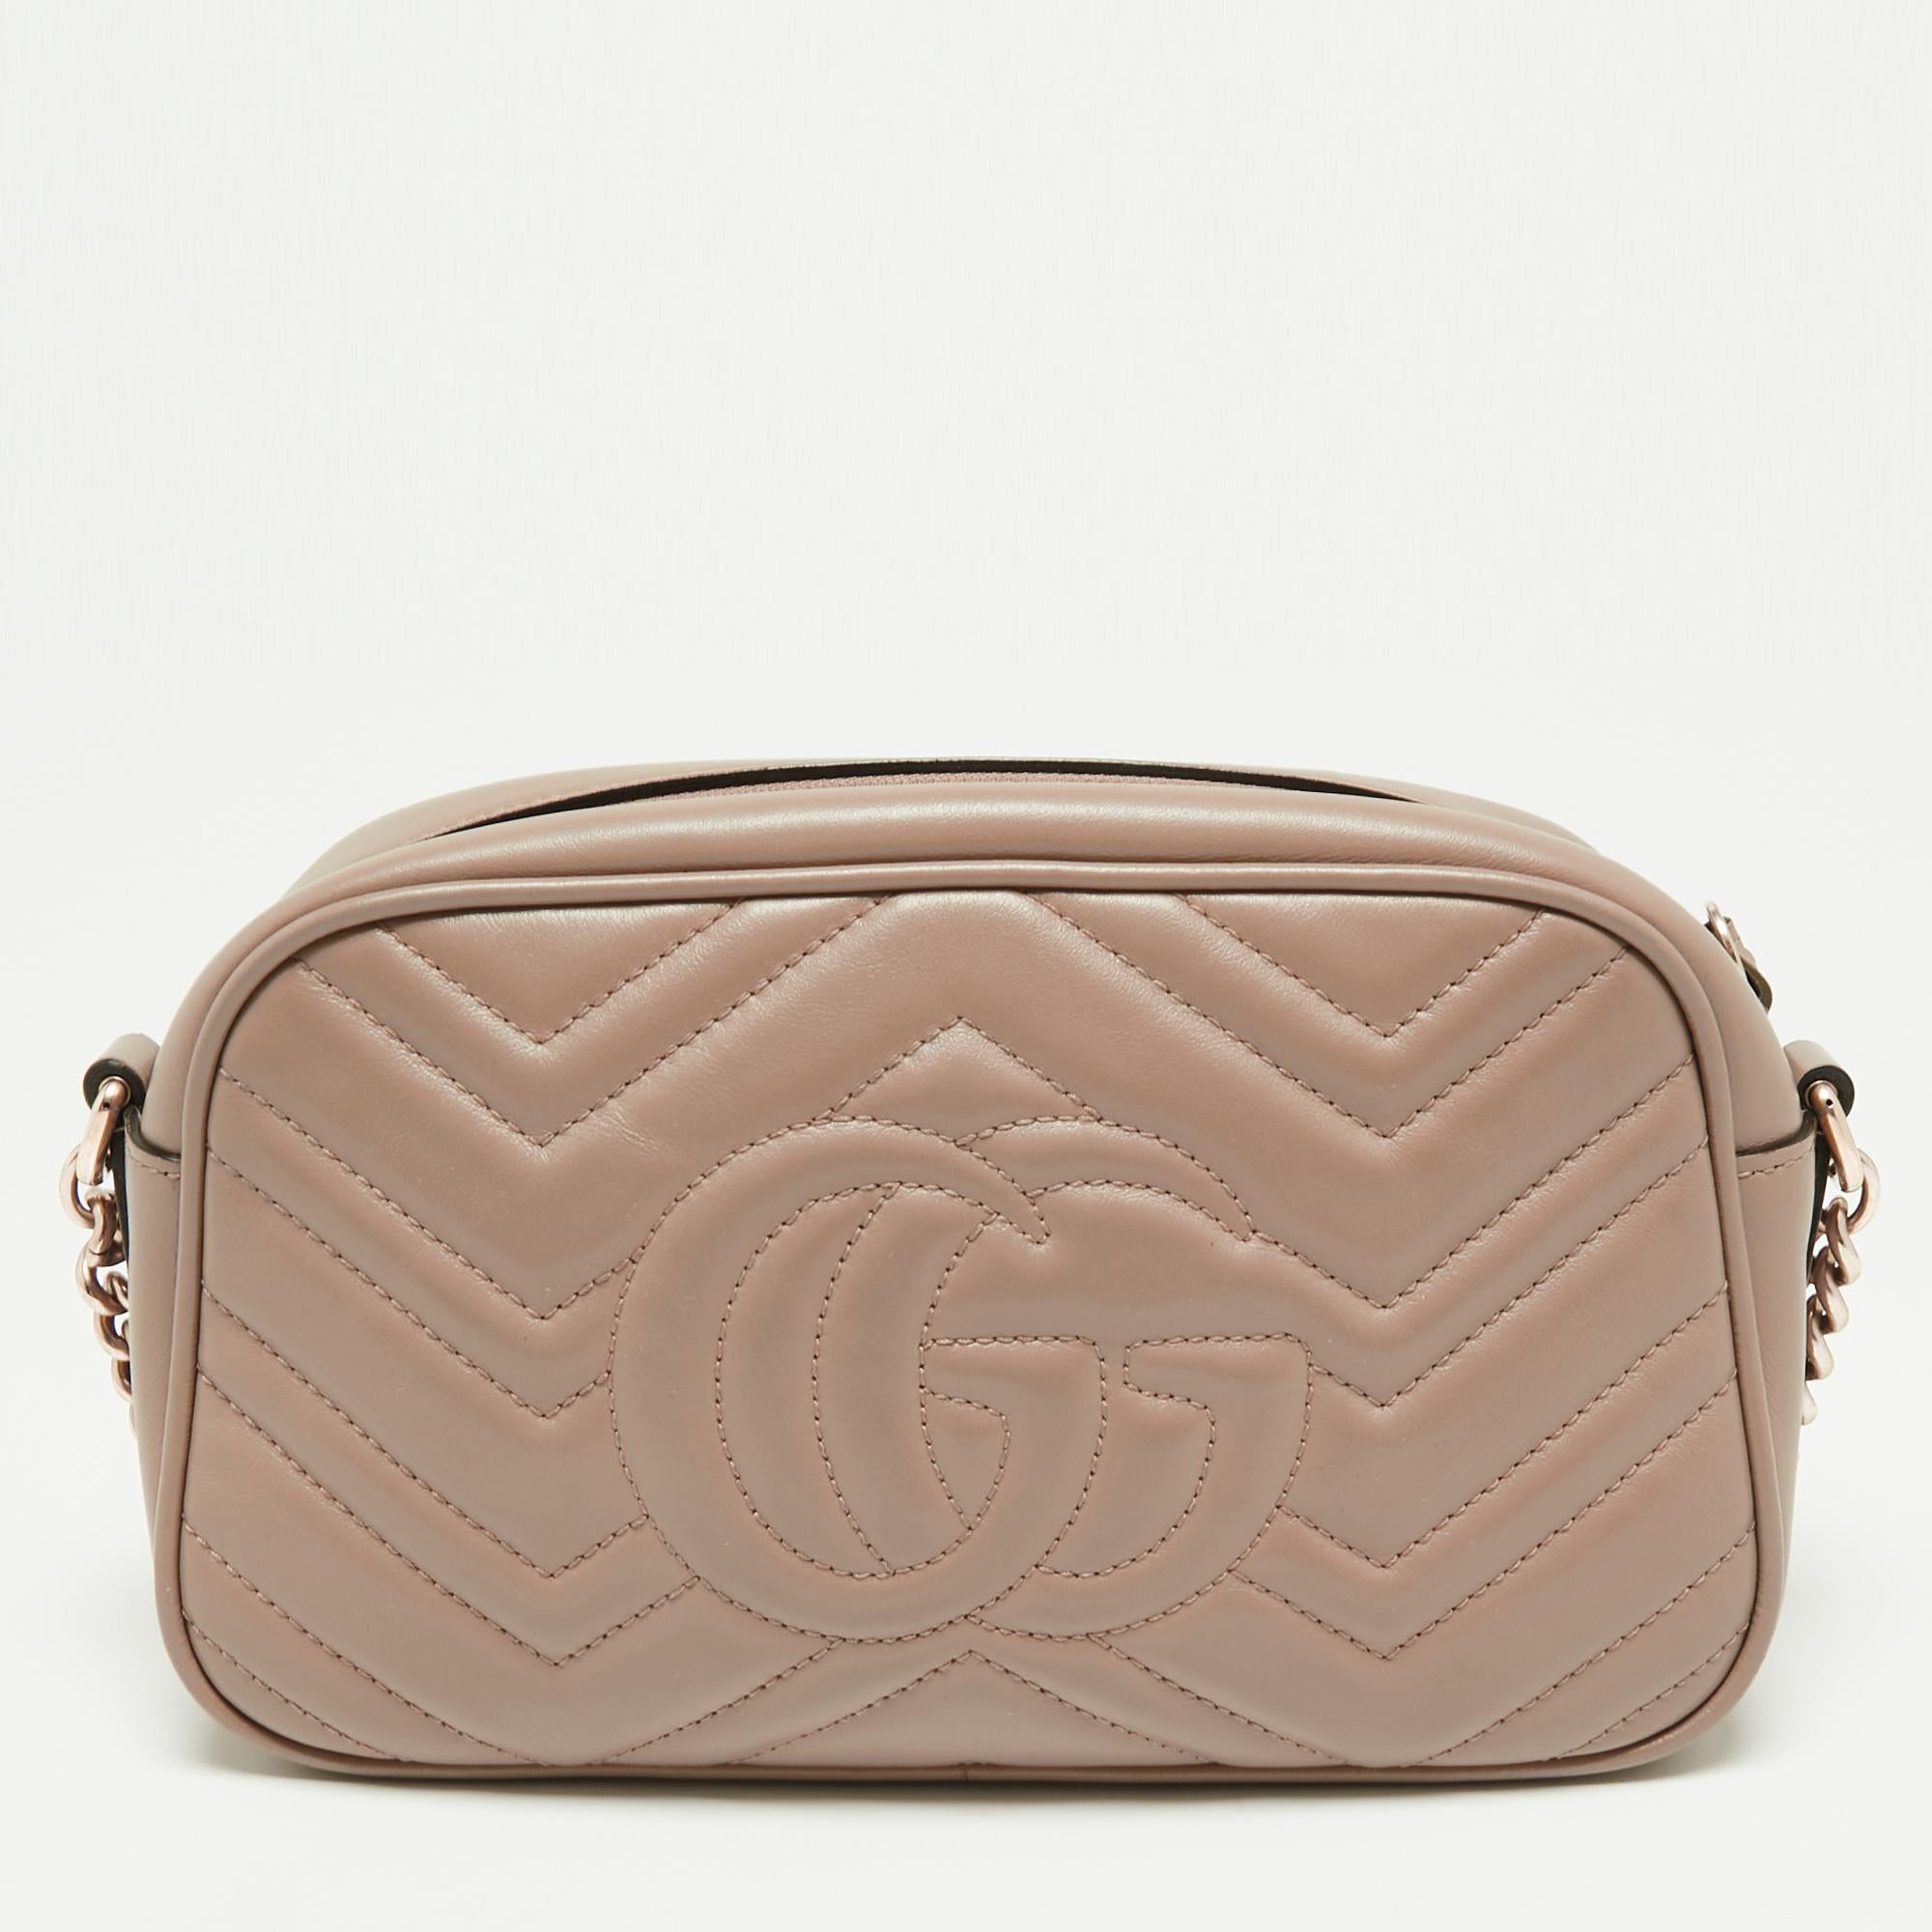 Innovative and sophisticated, this Gucci Marmont bag evokes a sense of classic glamour. Finely crafted from matelassé leather, it gets a luxe update with the interlocking 'GG' motif on the front and features a suede-lined interior. The chain-leather